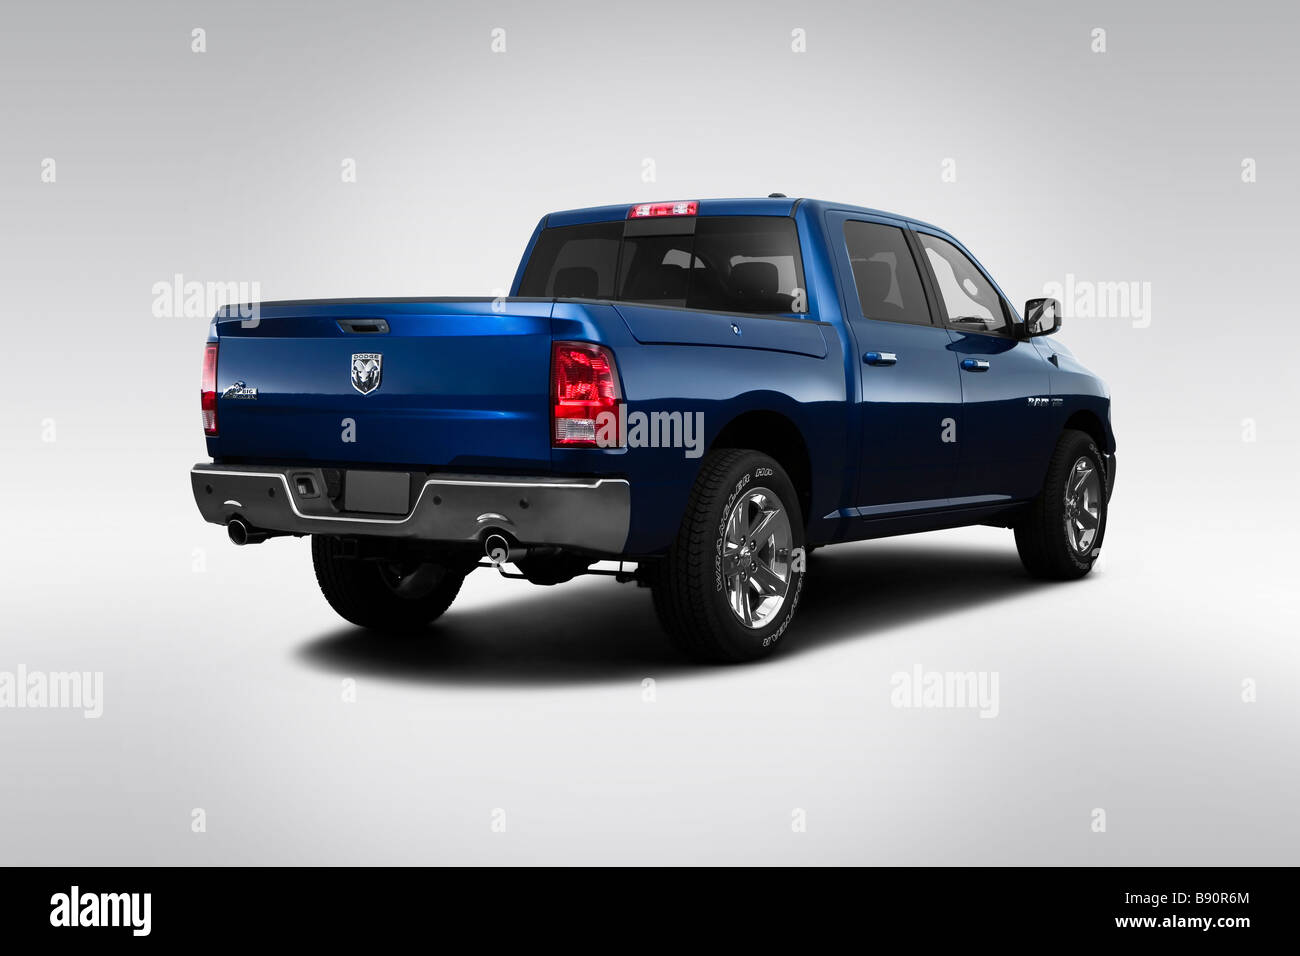 2009 Dodge Ram 1500 SLT in Blue - Rear angle view Stock Photo